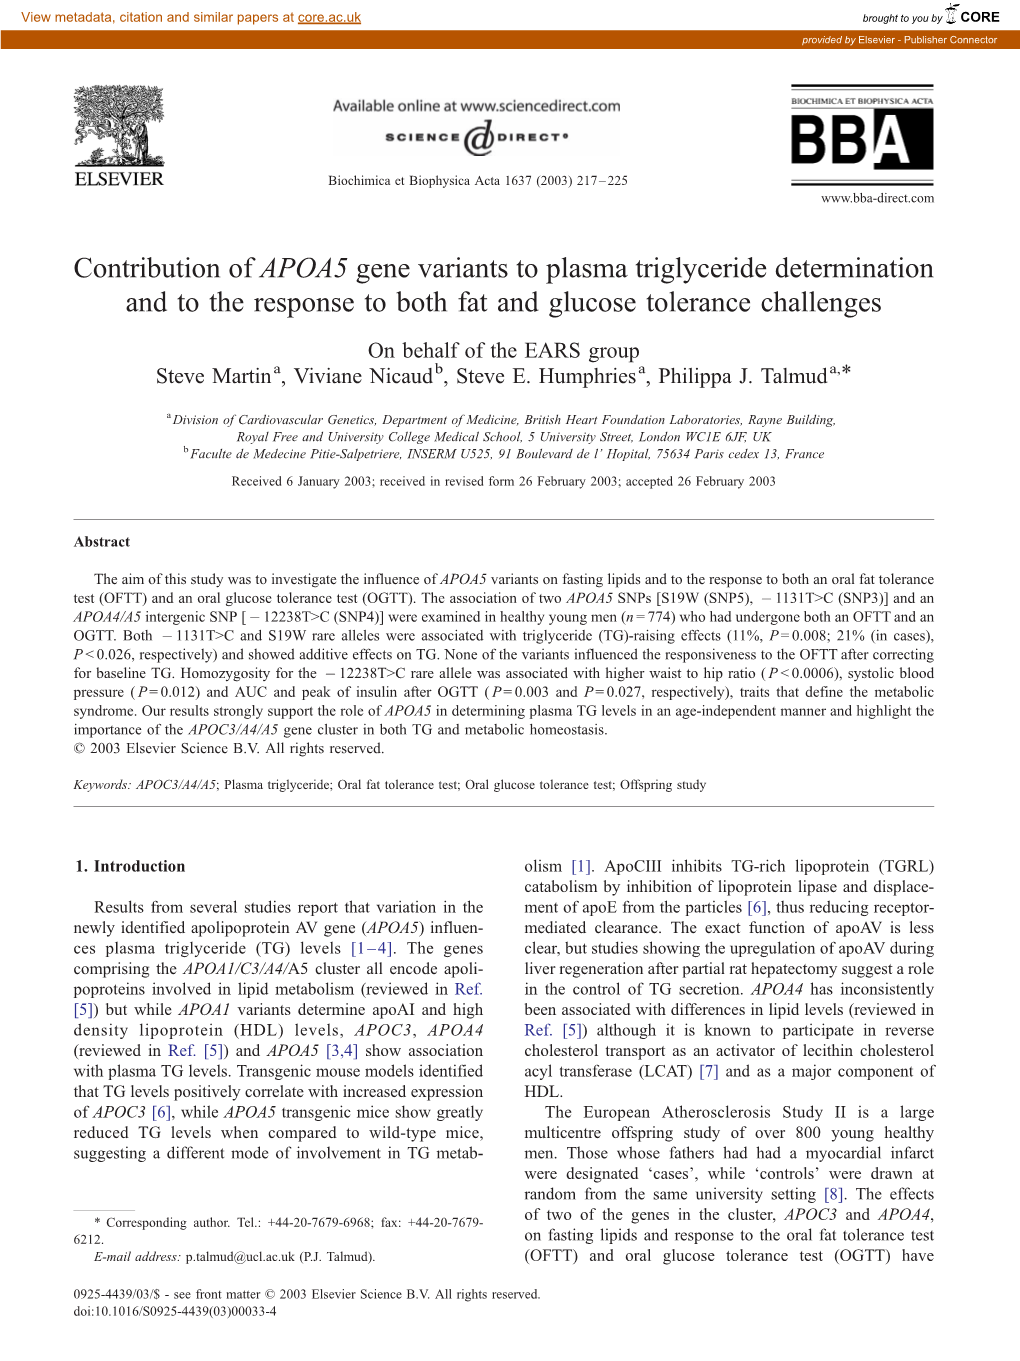 Contribution of APOA5 Gene Variants to Plasma Triglyceride Determination and to the Response to Both Fat and Glucose Tolerance Challenges